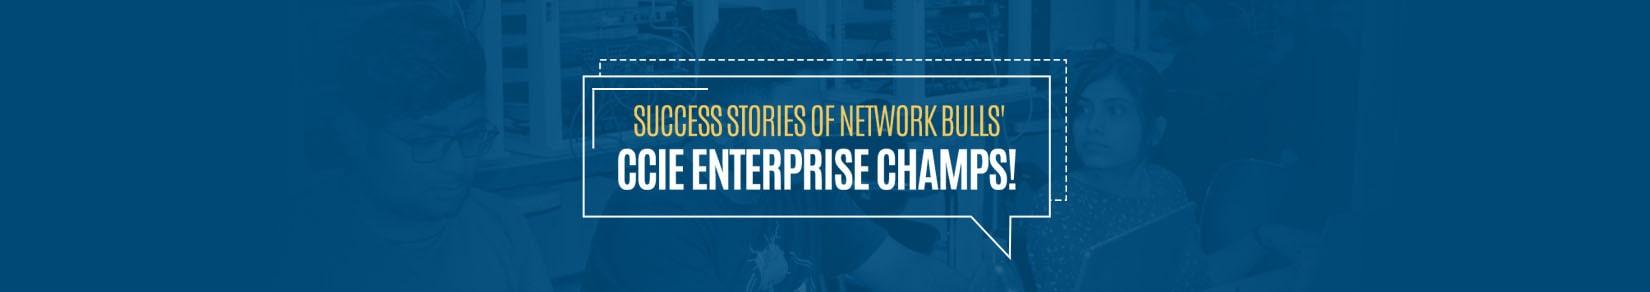 Success Stories of Network Bulls' CCIE Enterprise Champs! - Get Inspired